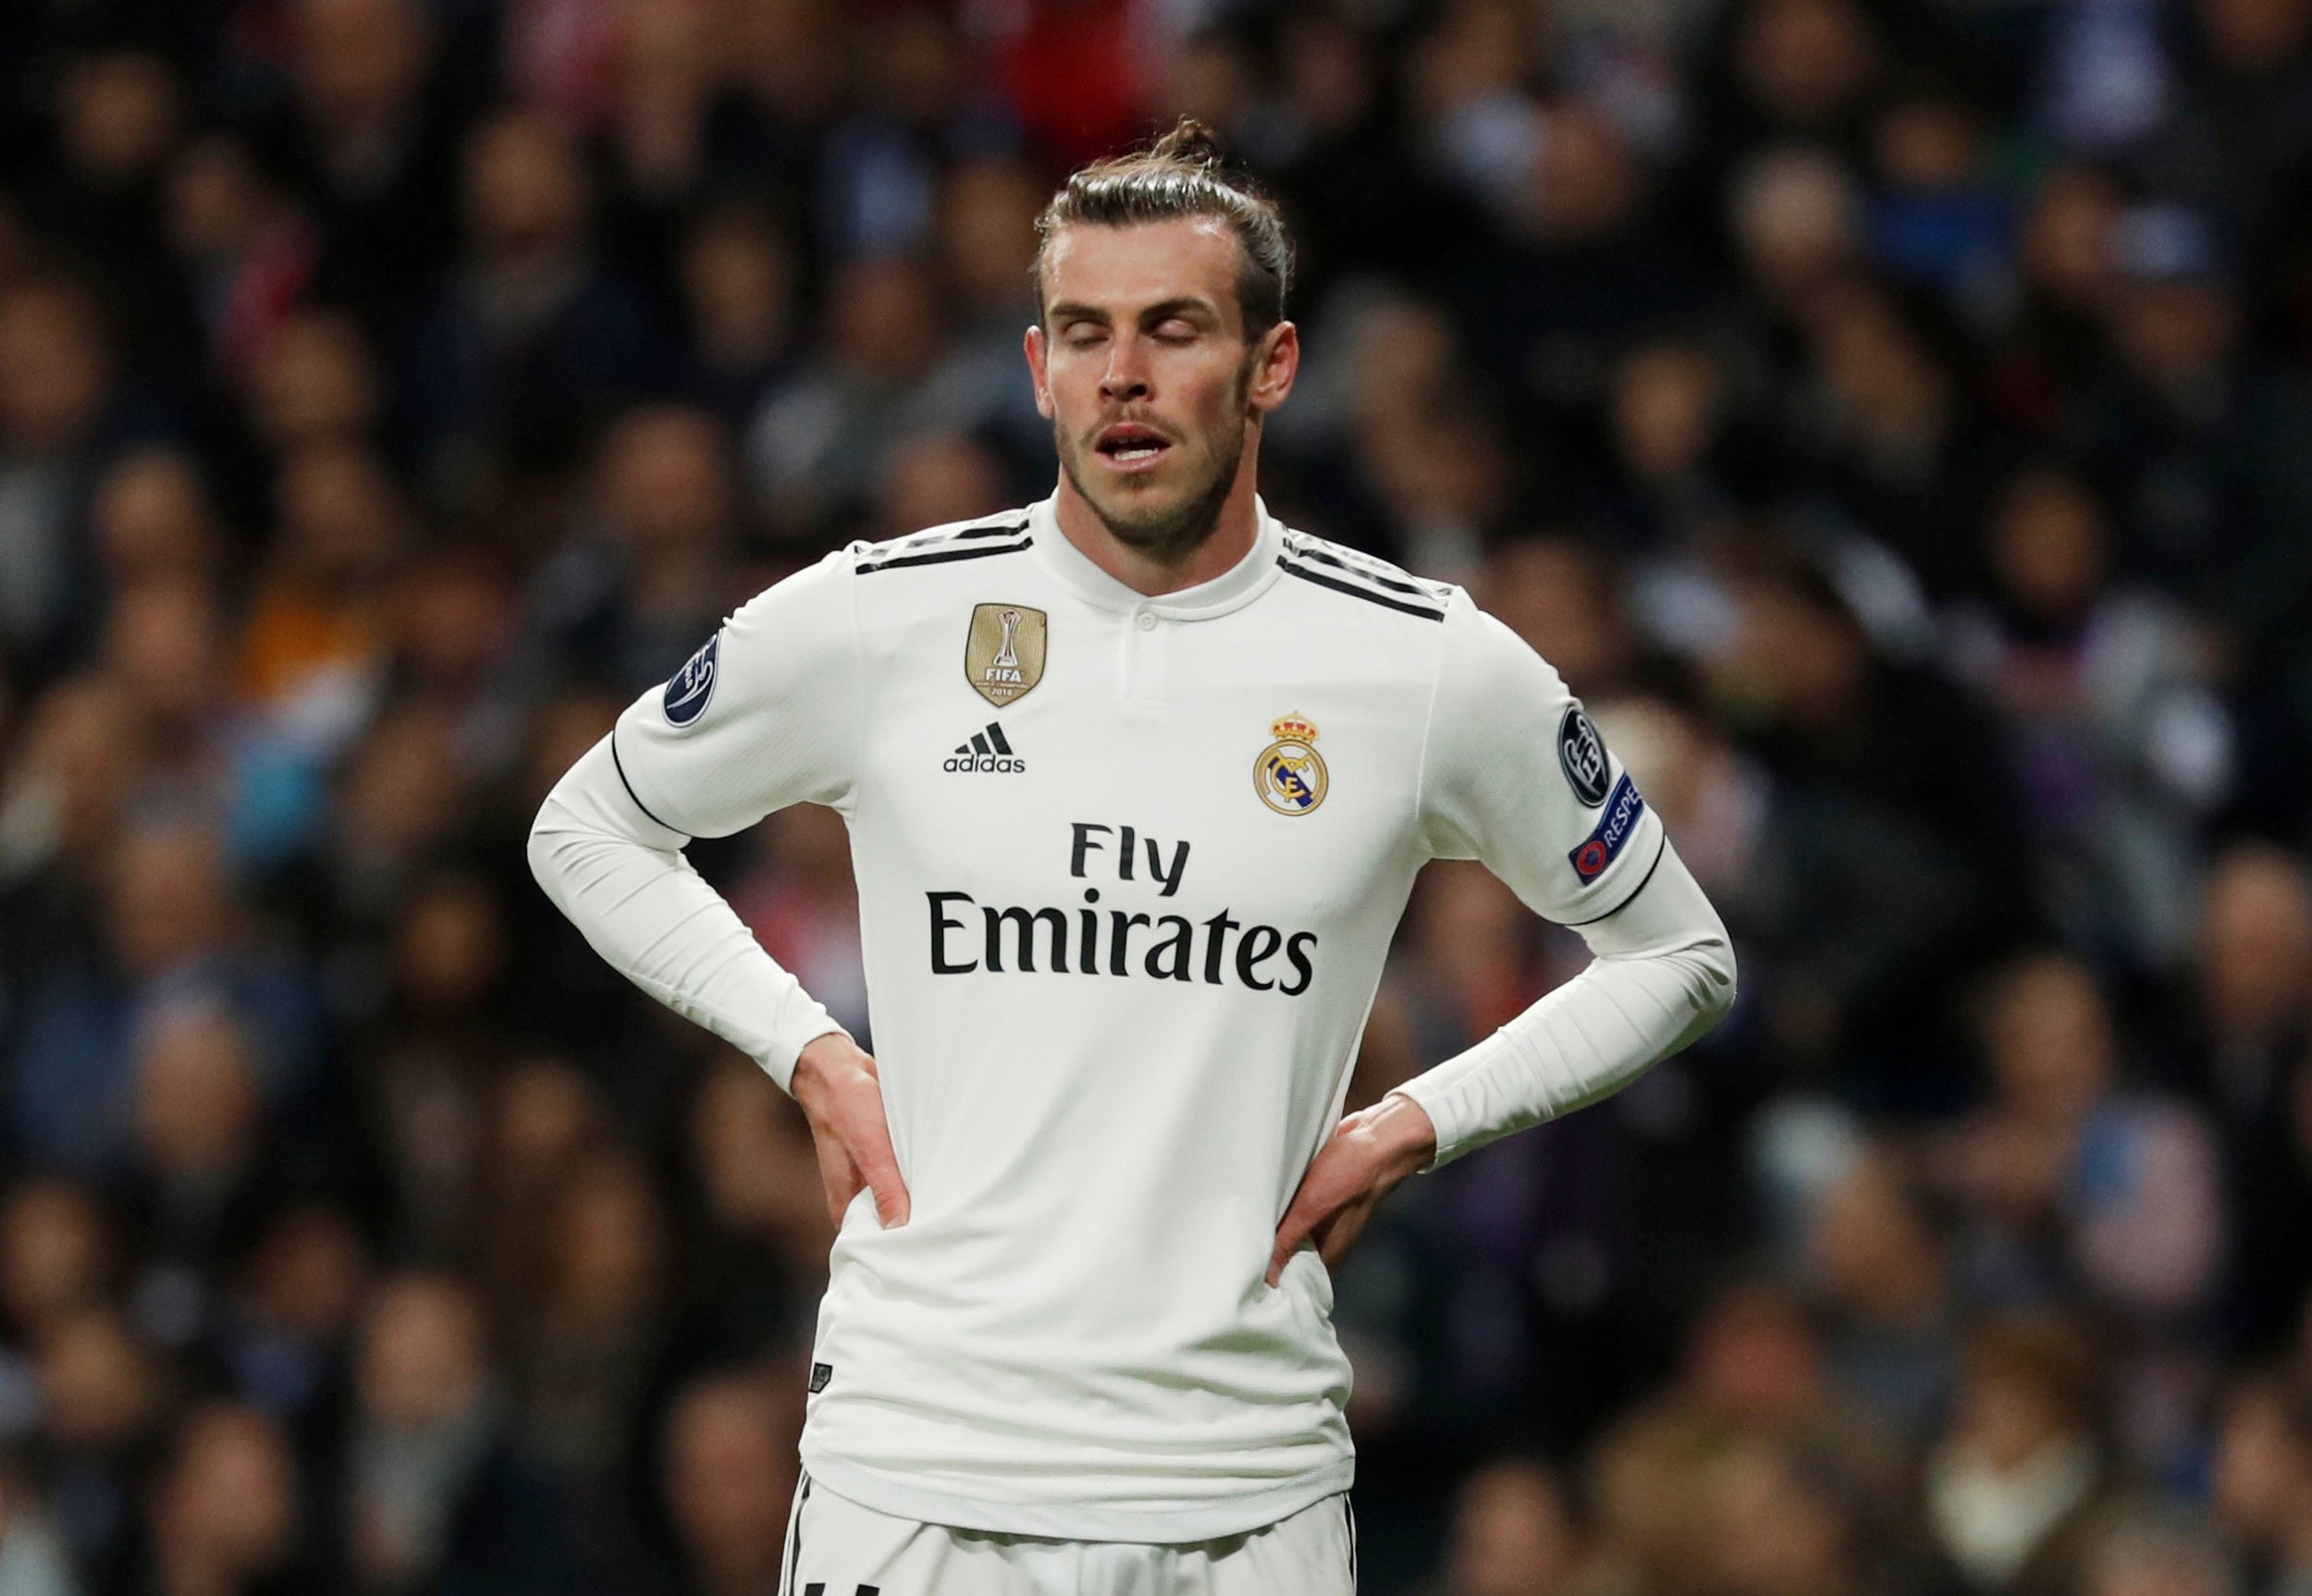 Bale has been linked with a move back to the Premier League